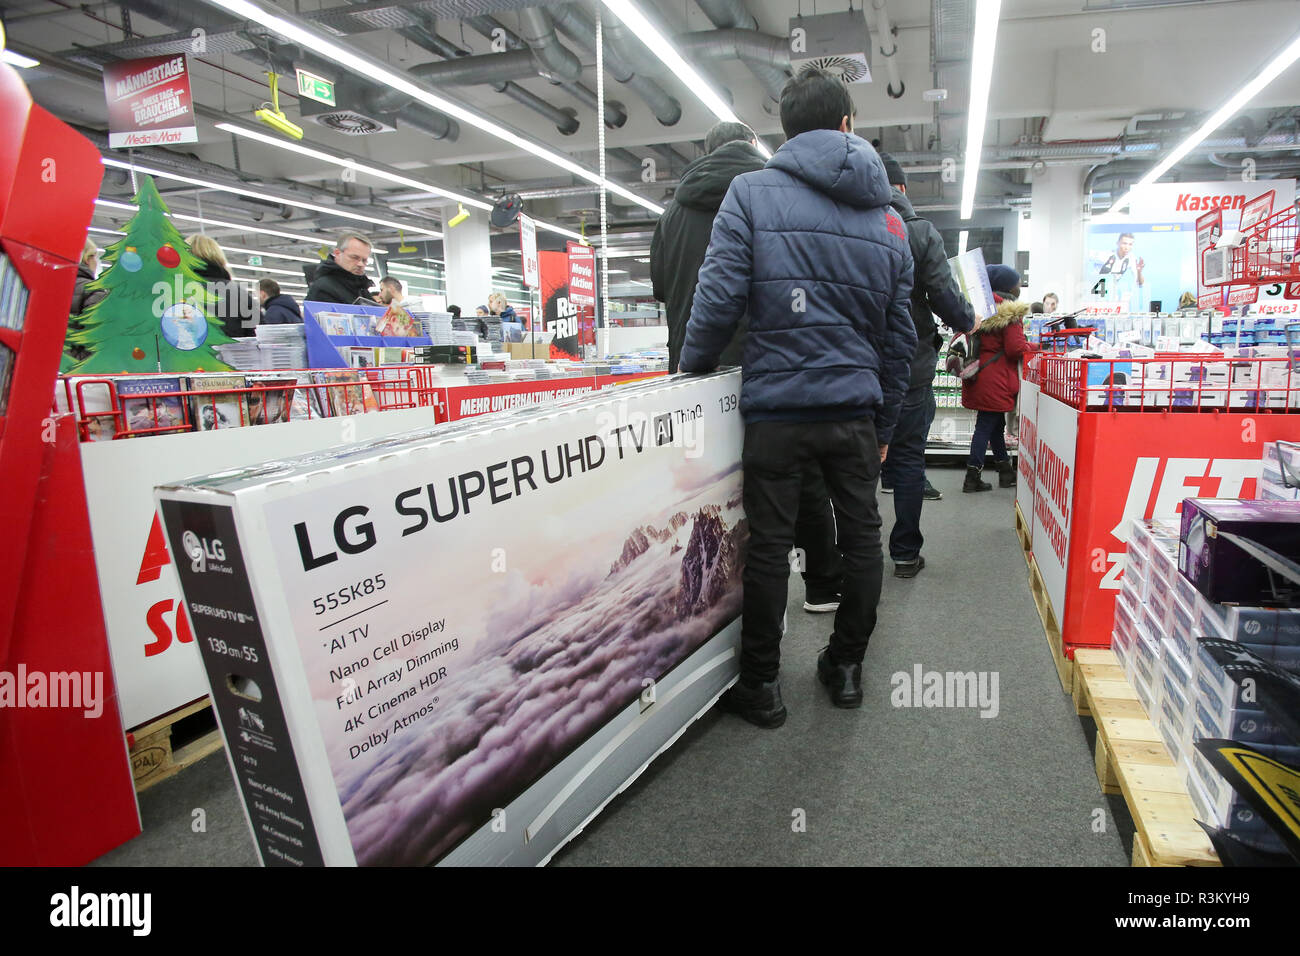 23 November 2018, Hamburg: On the "Black Friday" discount day in a Media  Markt store, customers queue up at the checkout counters. According to  estimates by the Handelsverband Deutschland (HDE), the discount